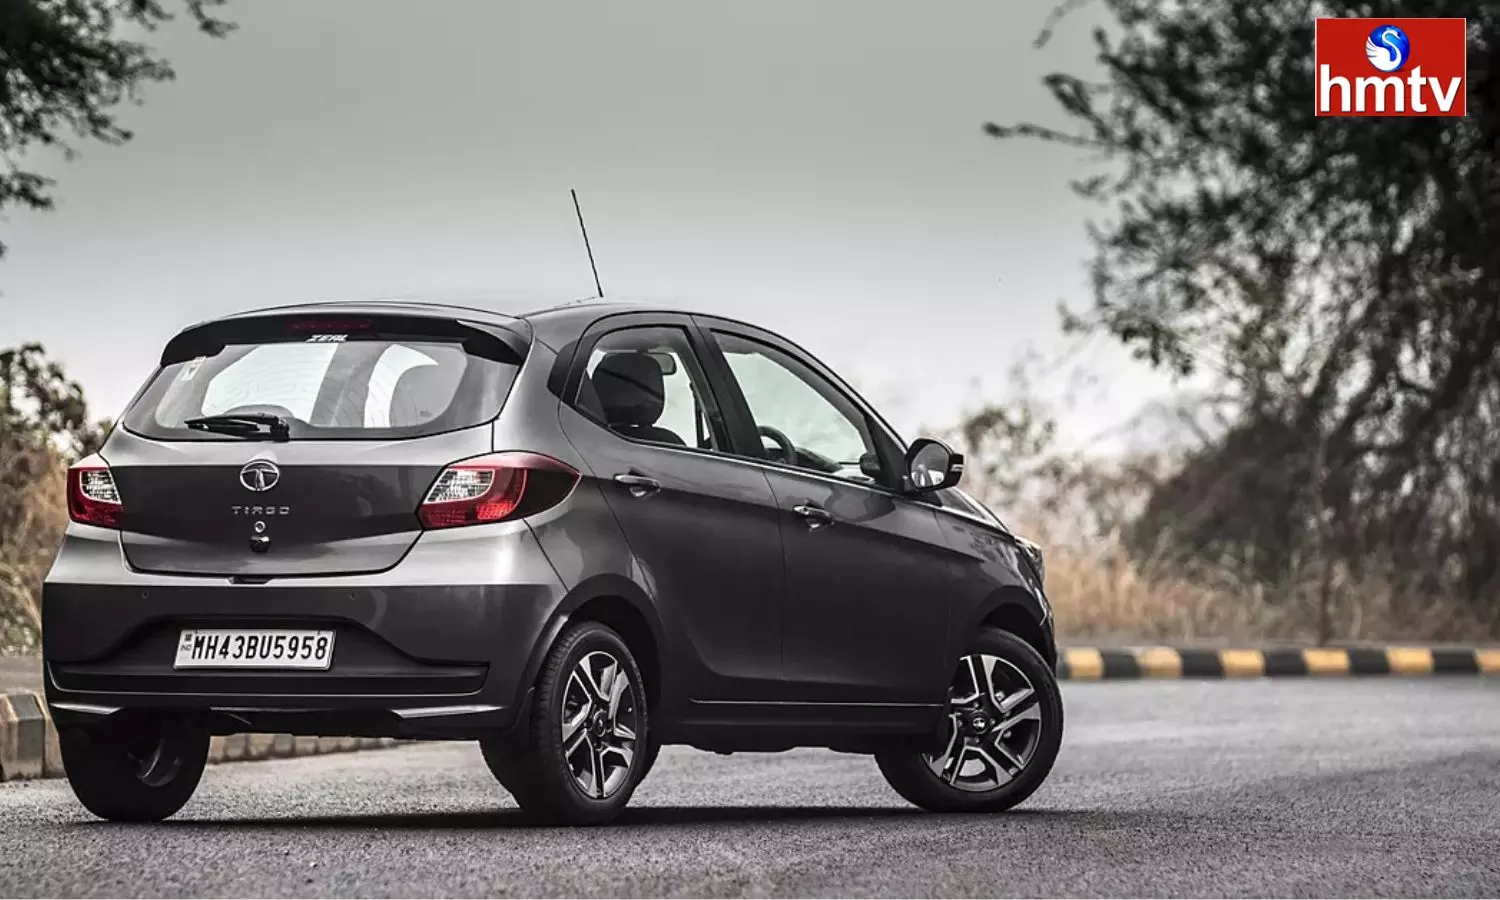 Tata Tiago best hatchback for middle class under budget of 7 lakh